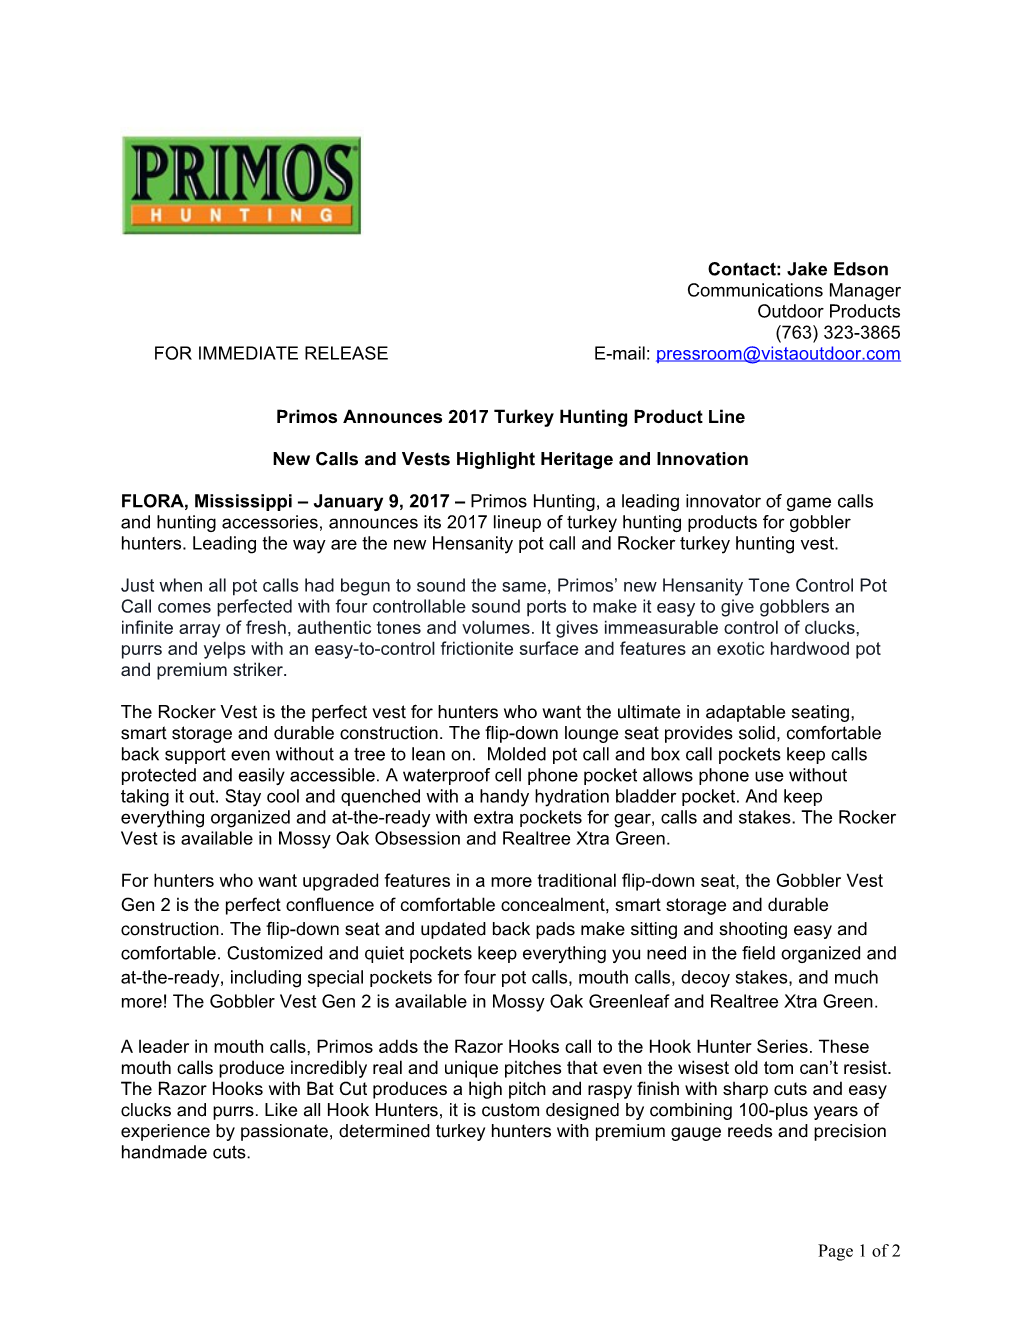 Primos Announces2017 Turkey Hunting Product Line